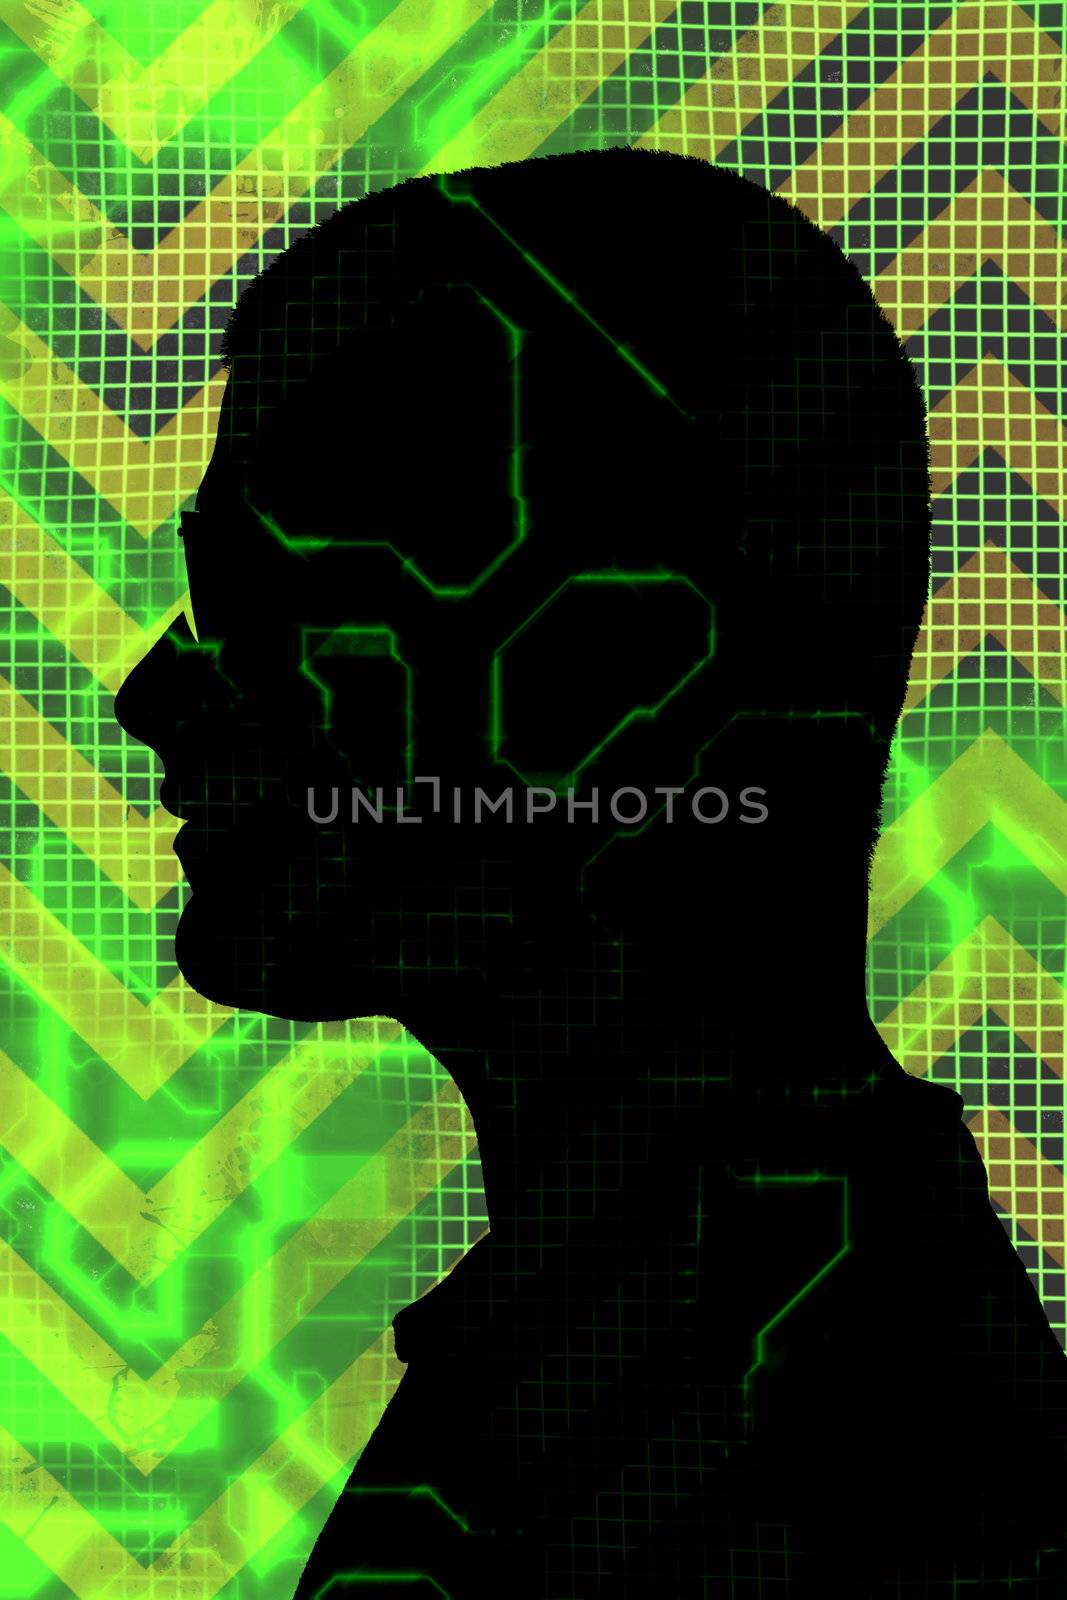 Digital Man Silhouette by graficallyminded